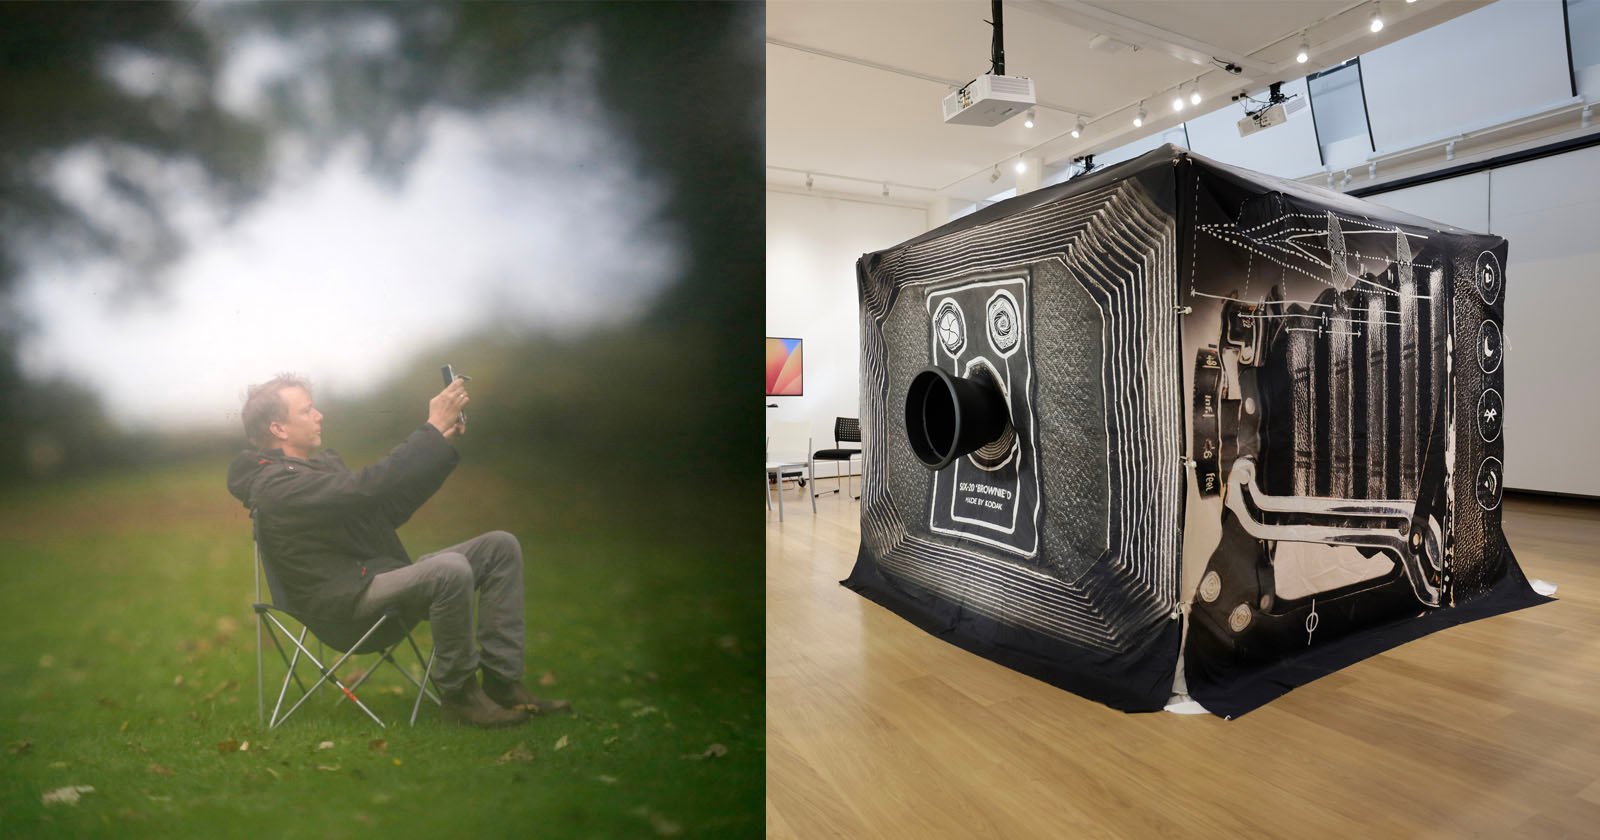  world first camera obscura can 